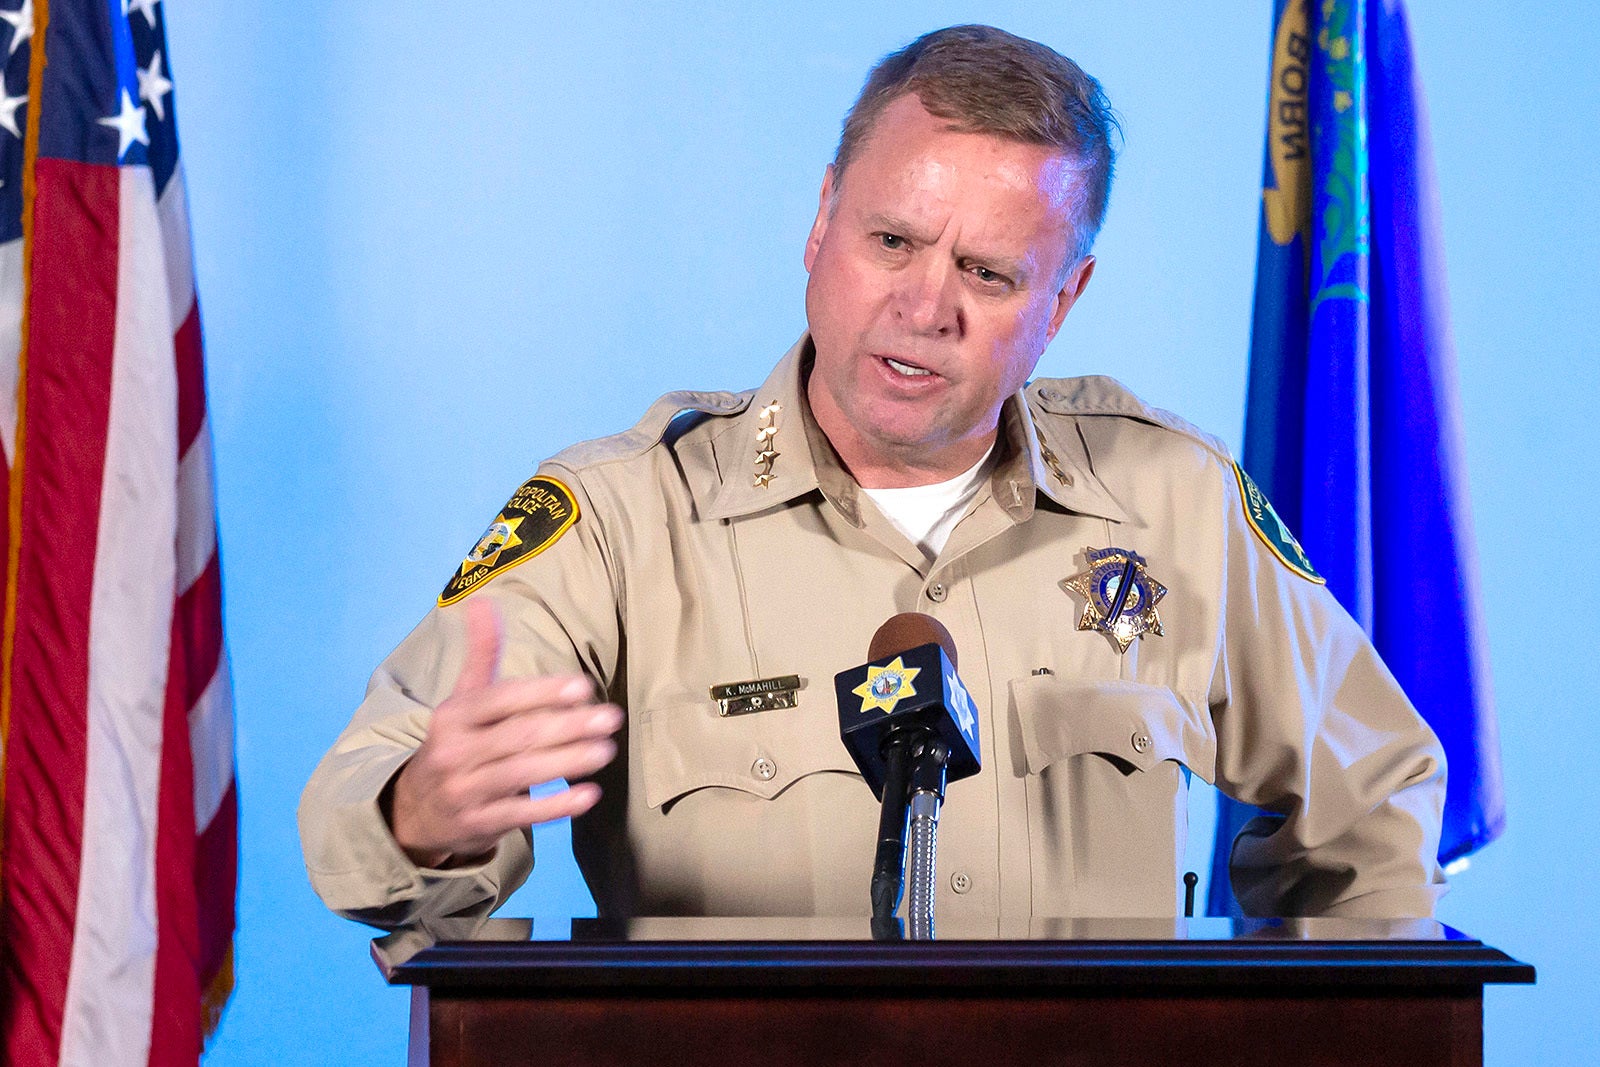 Clark County Sheriff Kevin McMahill formally identified Polito at a press conference on Thursday